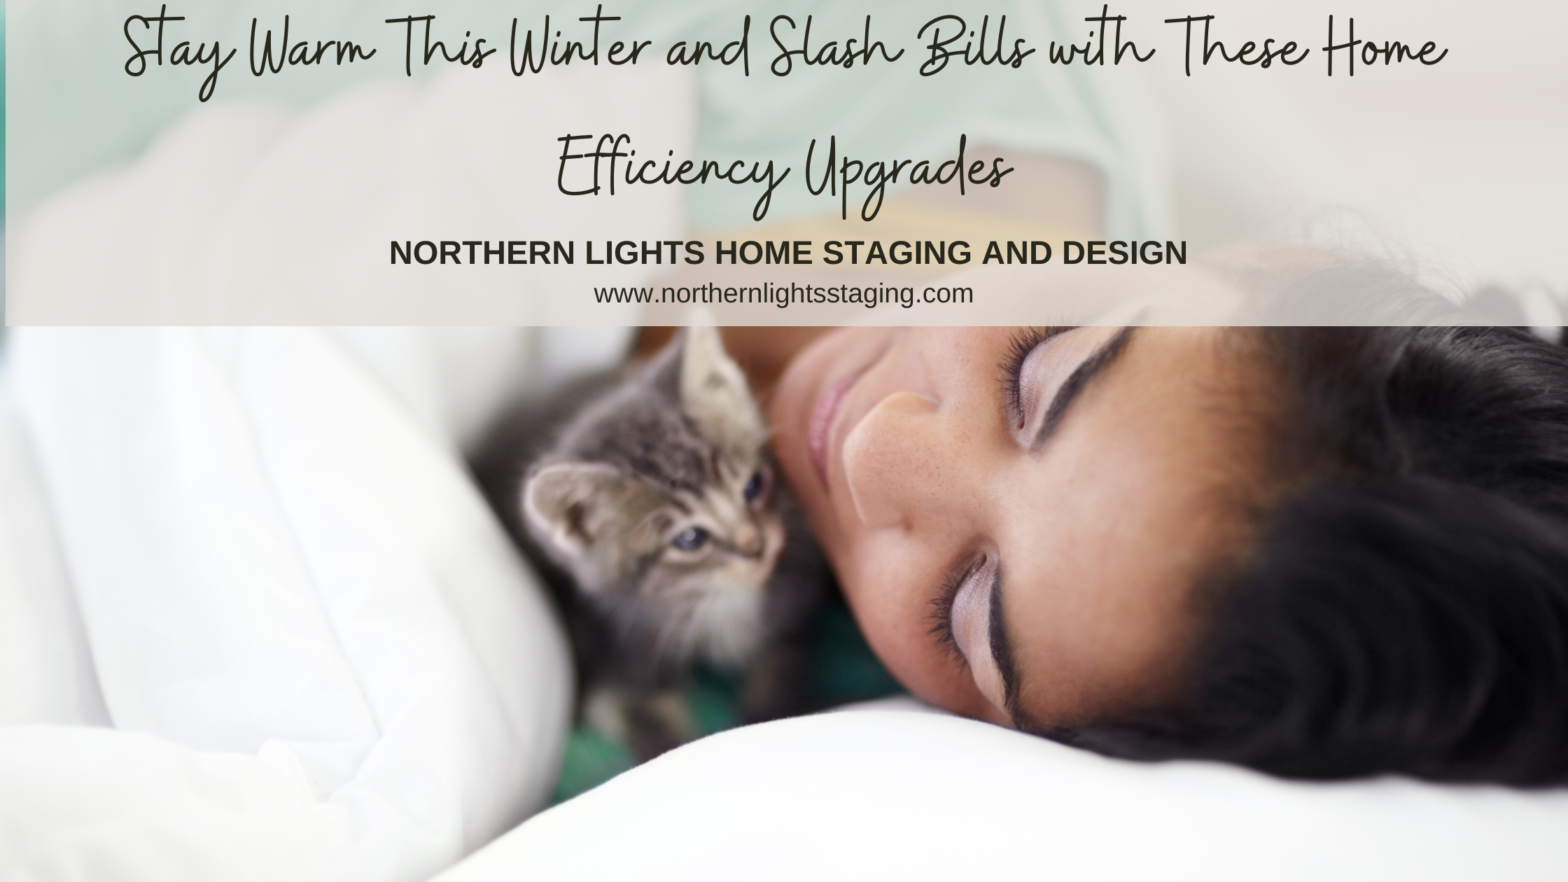 Stay Warm This Winter and Slash Bills with These Home Efficiency Upgrades by Dennis Kane for Northern Lights Home Staging and Design.